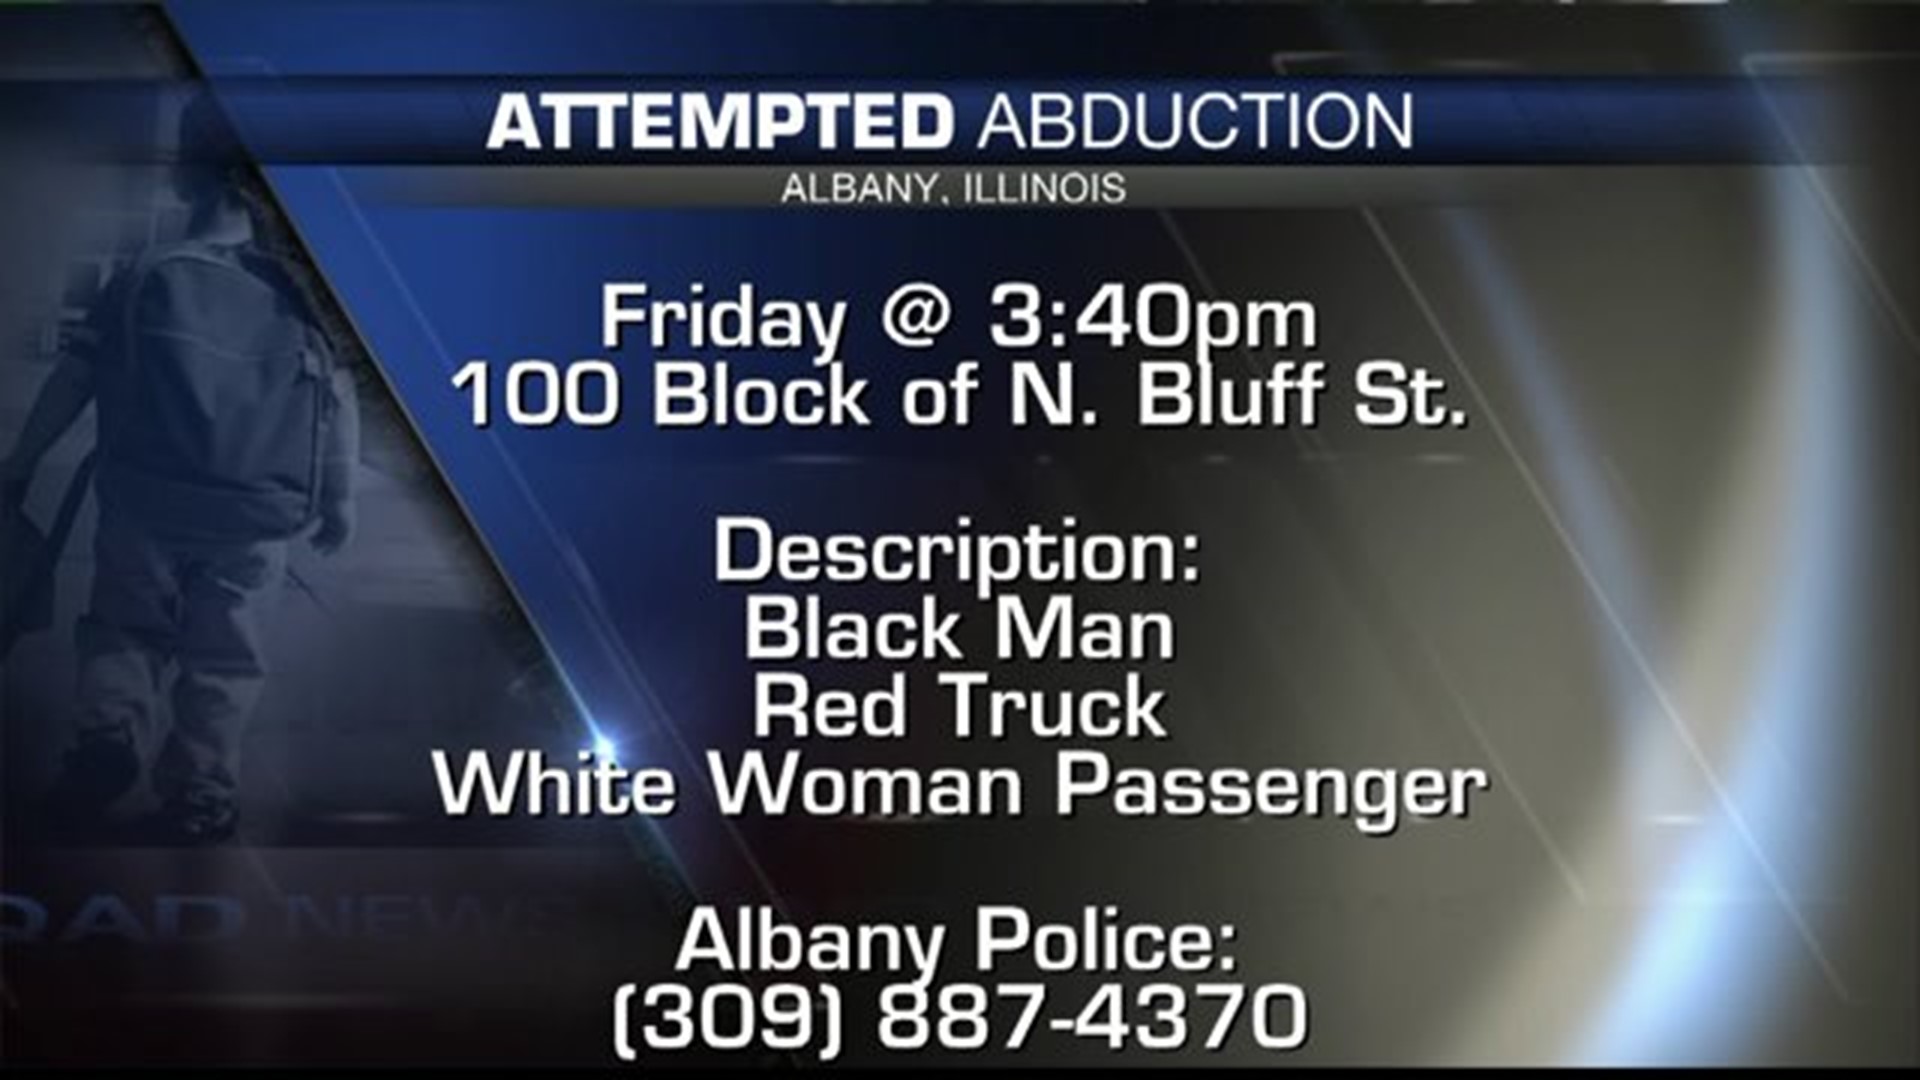 Attempted Abduction